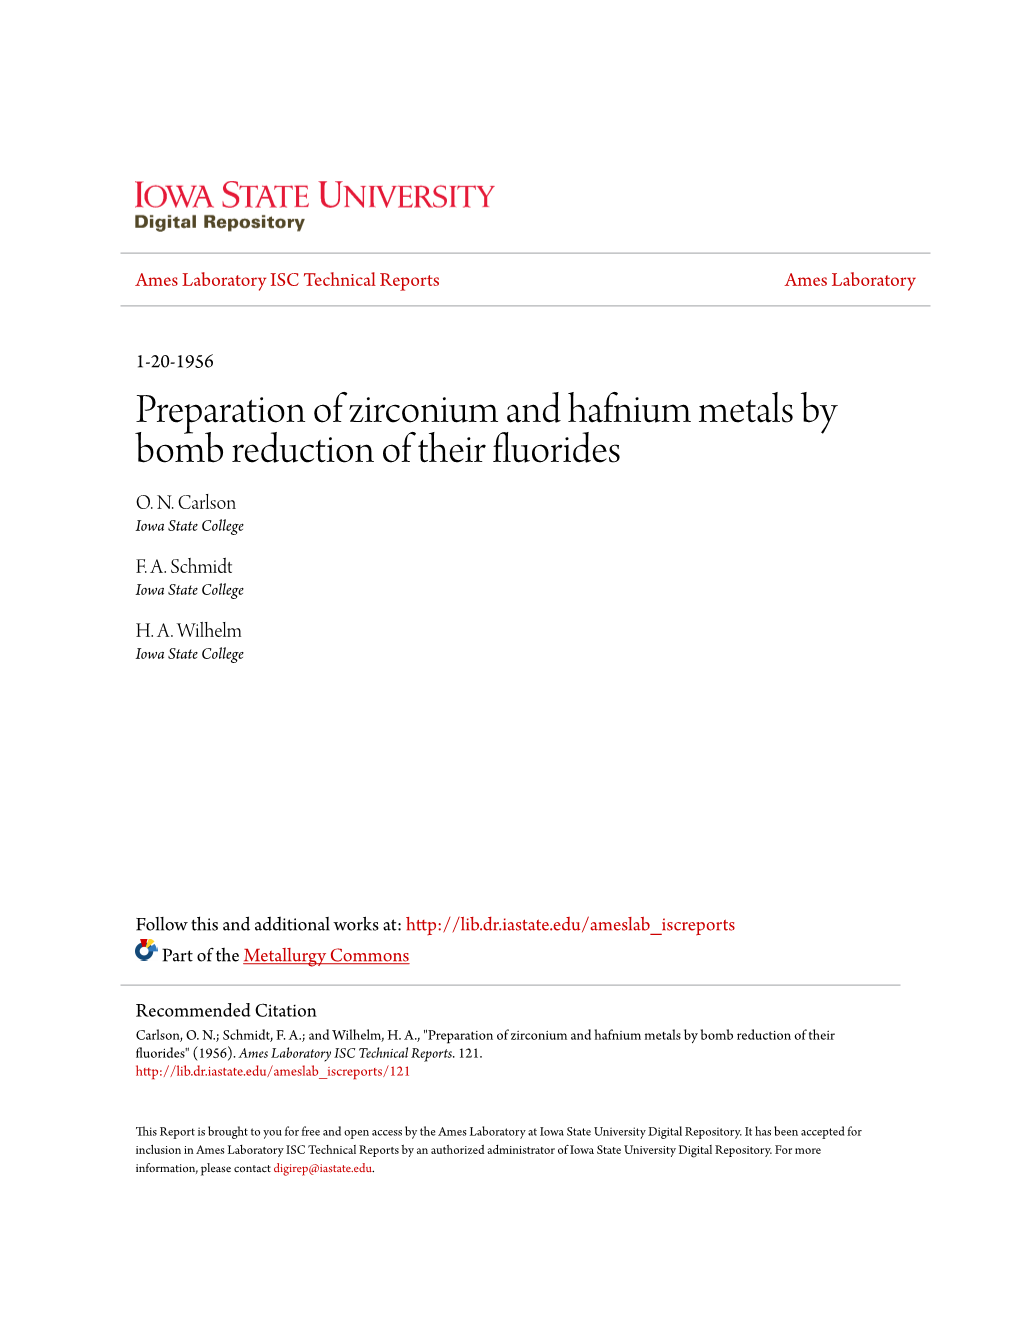 Preparation of Zirconium and Hafnium Metals by Bomb Reduction of Their Fluorides O